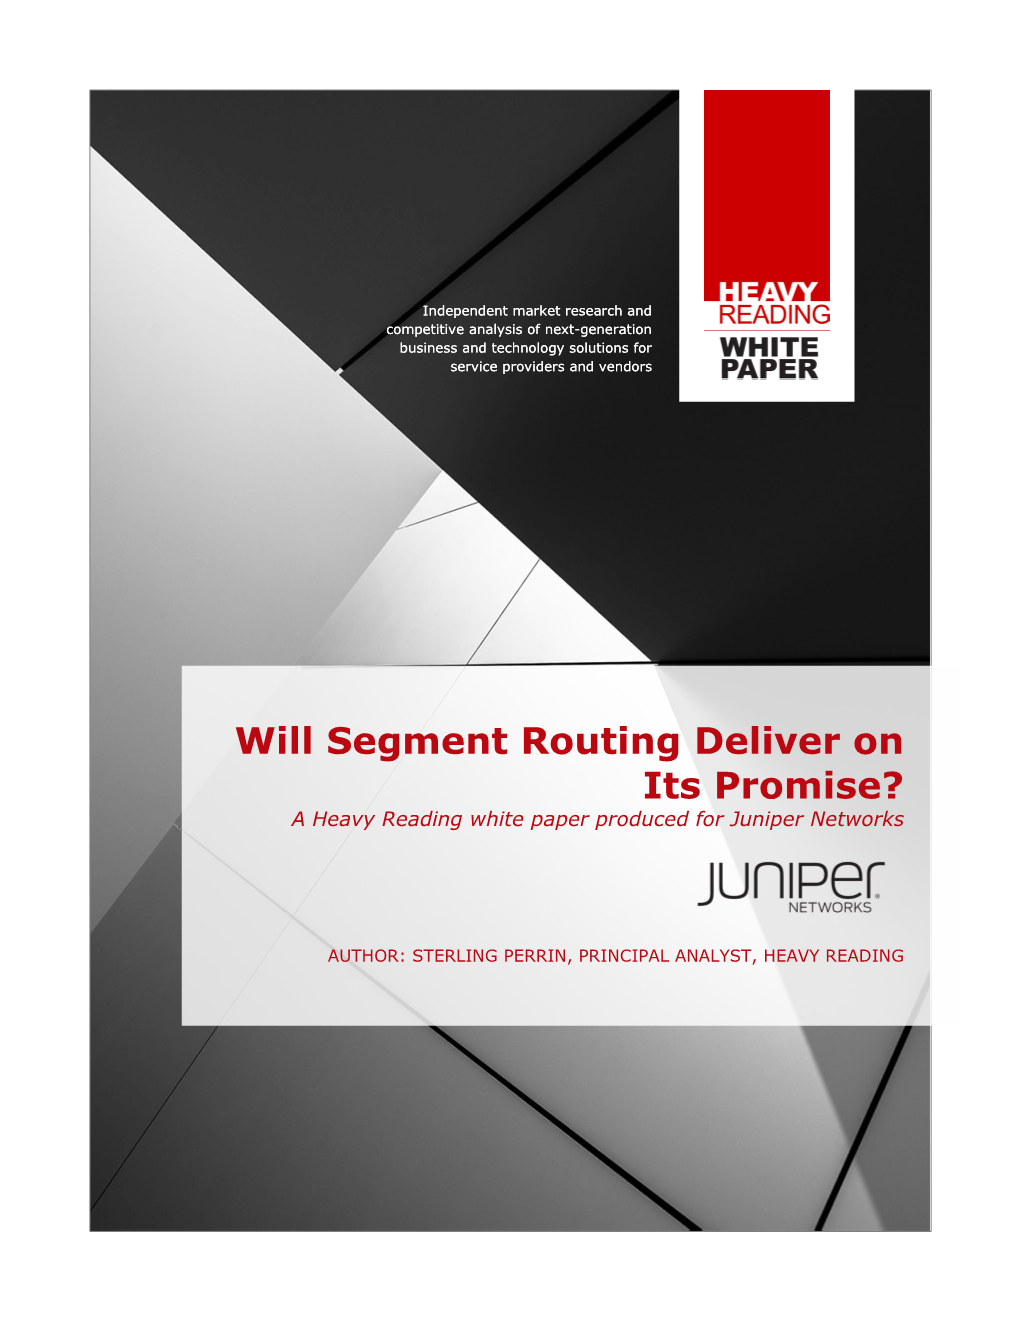 Will Segment Routing Deliver on Its Promise? a Heavy Reading White Paper Produced for Juniper Networks